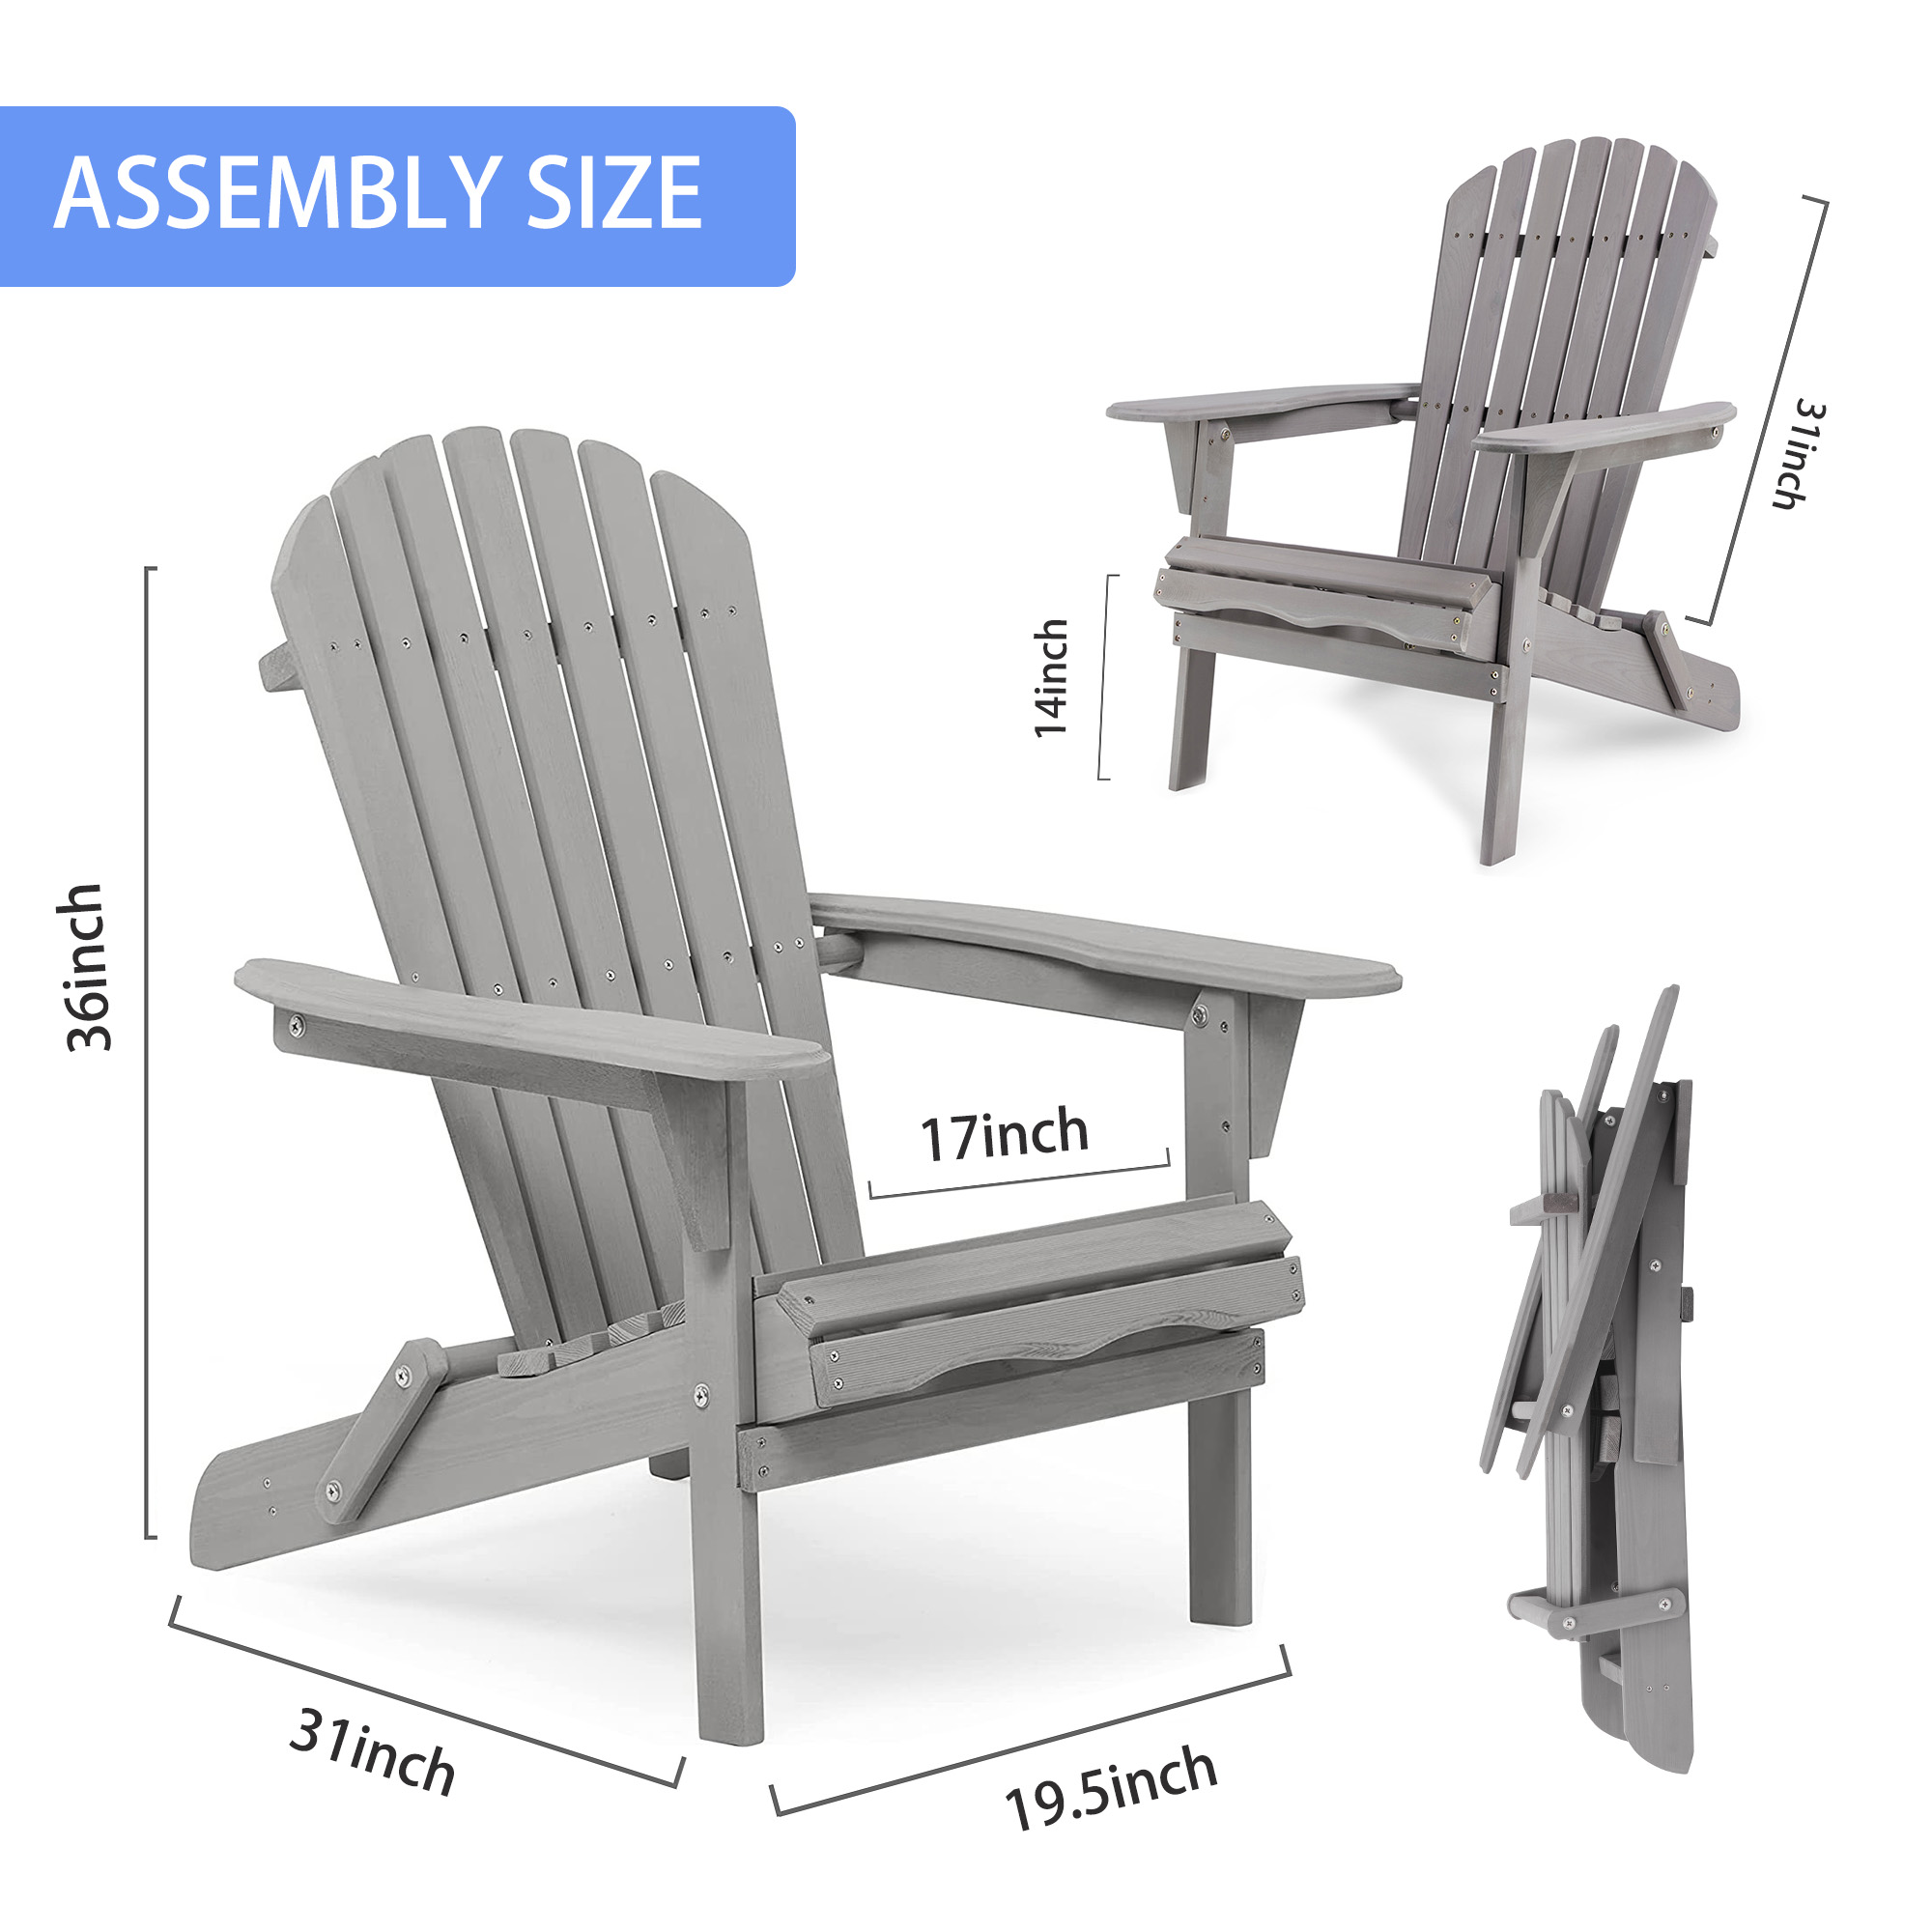 CLEARANCE! Wood Lounge Patio Chair for Garden Outdoor Wooden Folding Adirondack Chair Set of 2 Solid Cedar Wood Lounge Patio Chair for Garden, Lawn, Backyard, - image 4 of 9